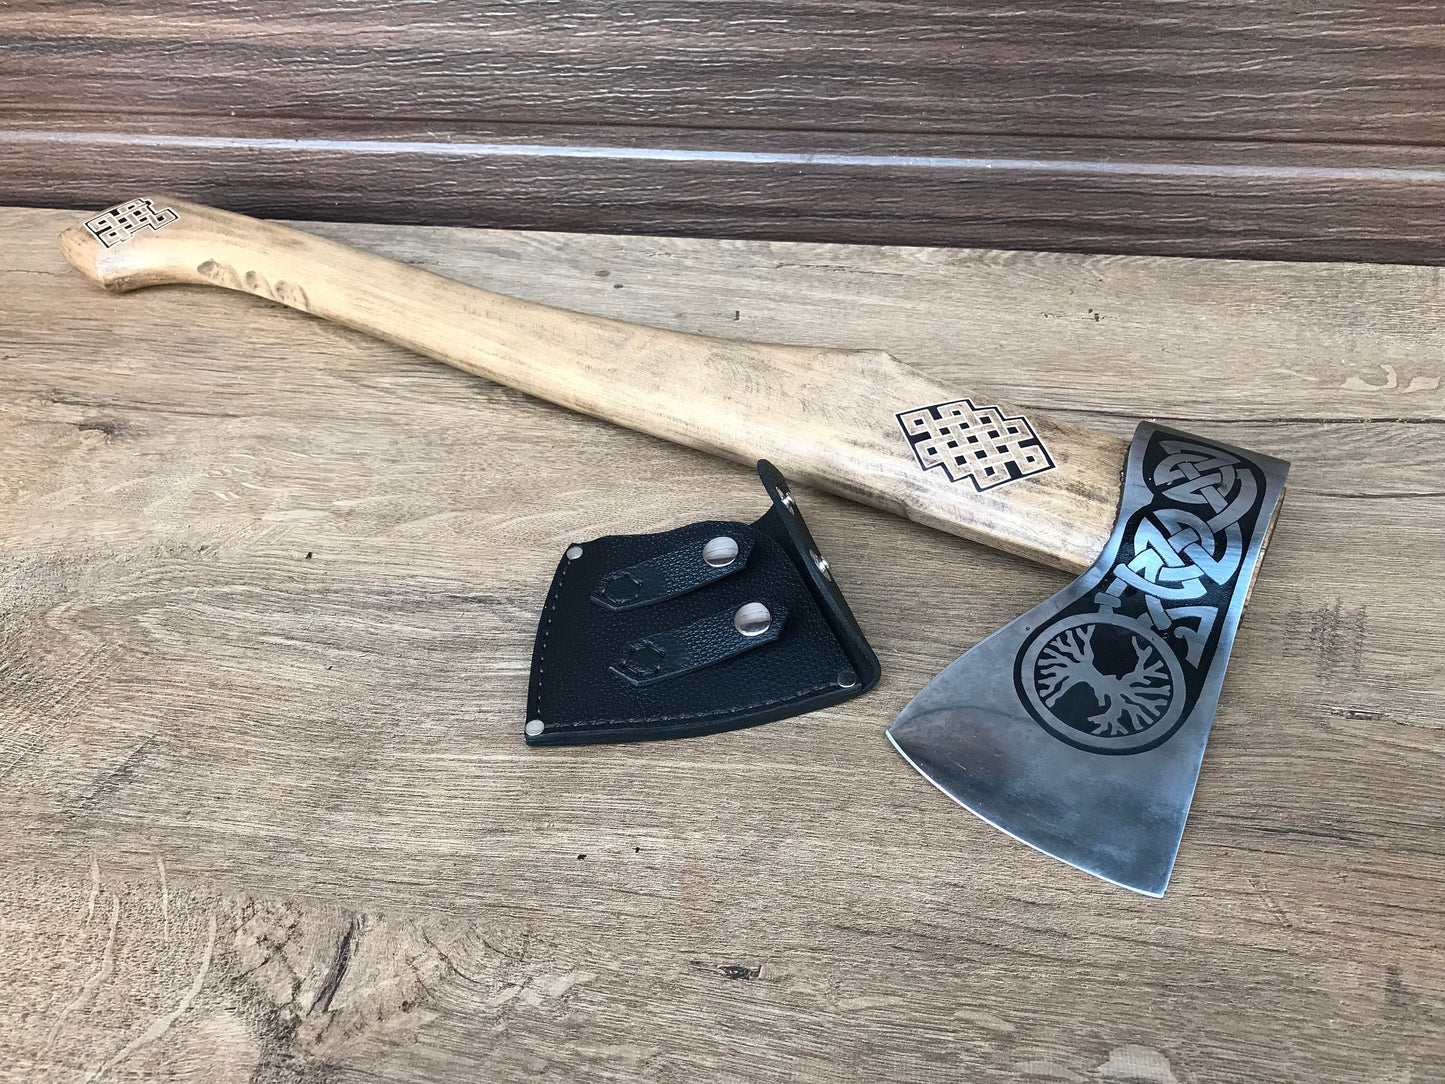 Viking axe, gift for men, gift for dad, gift for husband, axe, ax, tree of life, dads gift, medieval accessory, ancient accessory, mens gift